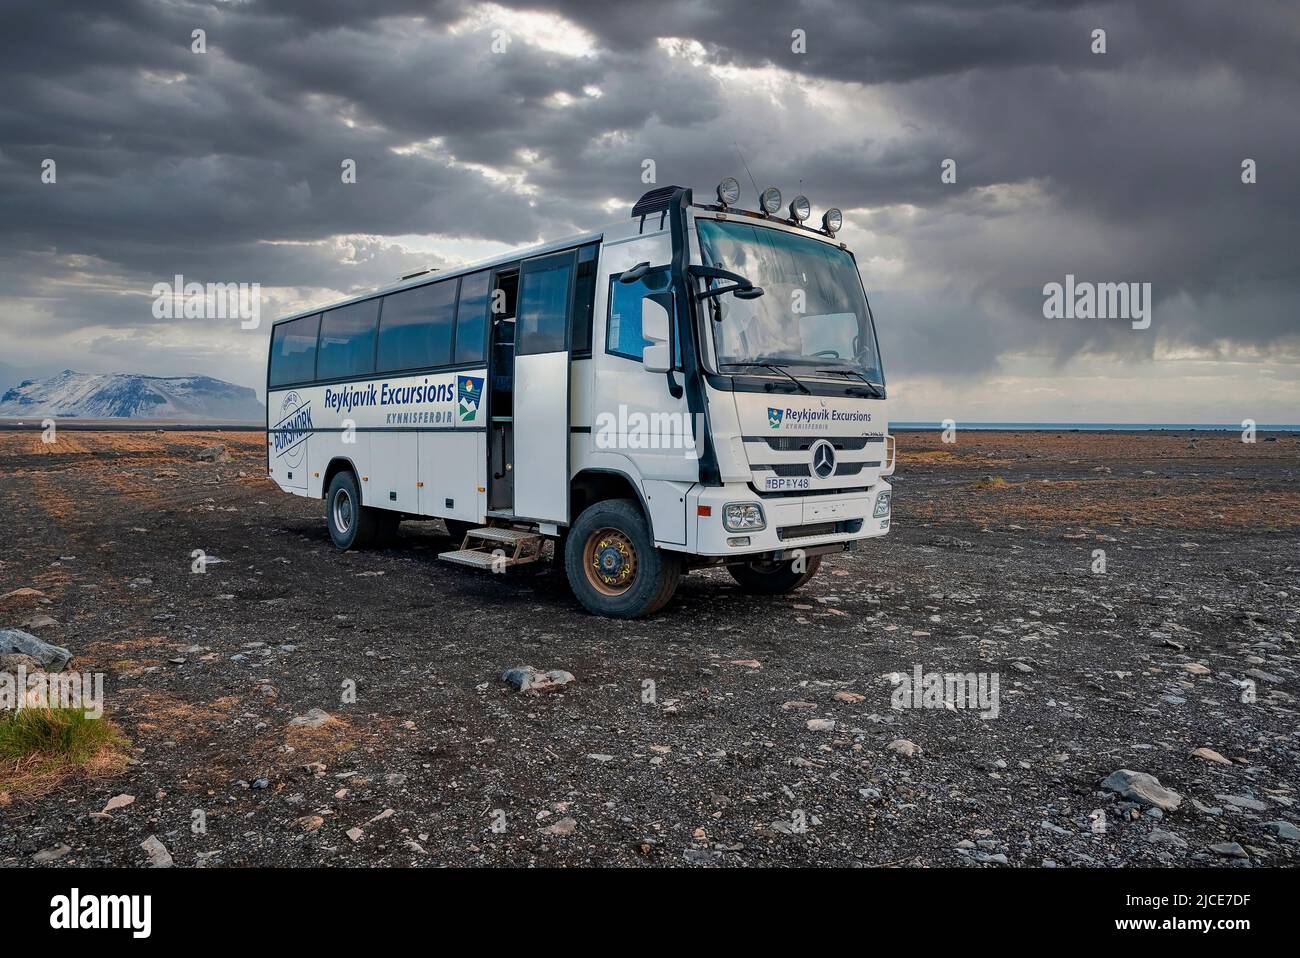 Reykjavik Excursions bus parked on lava sand at Highland against cloudy sky Stock Photo